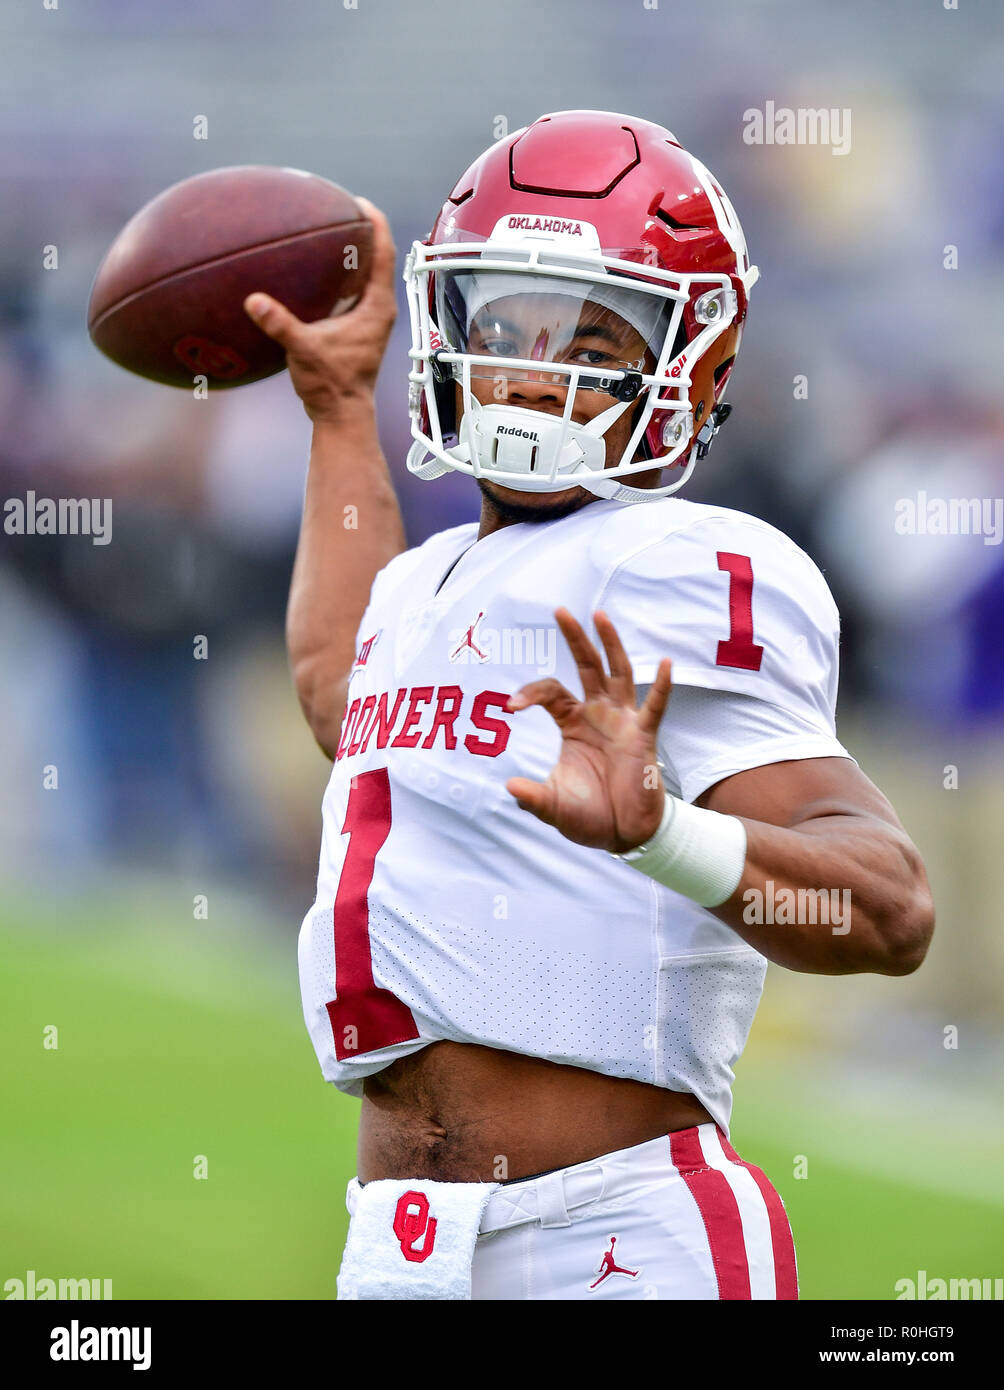 Oklahoma Sooners quarterback Kyler Murray (1) during the Oklahoma Sooners  at TCU Horned Frogs at an NCAA Football game at the Amon G. Carter Stadium,  Fort Worth Texas. 10/20/18.Manny Flores/Cal Sport Media